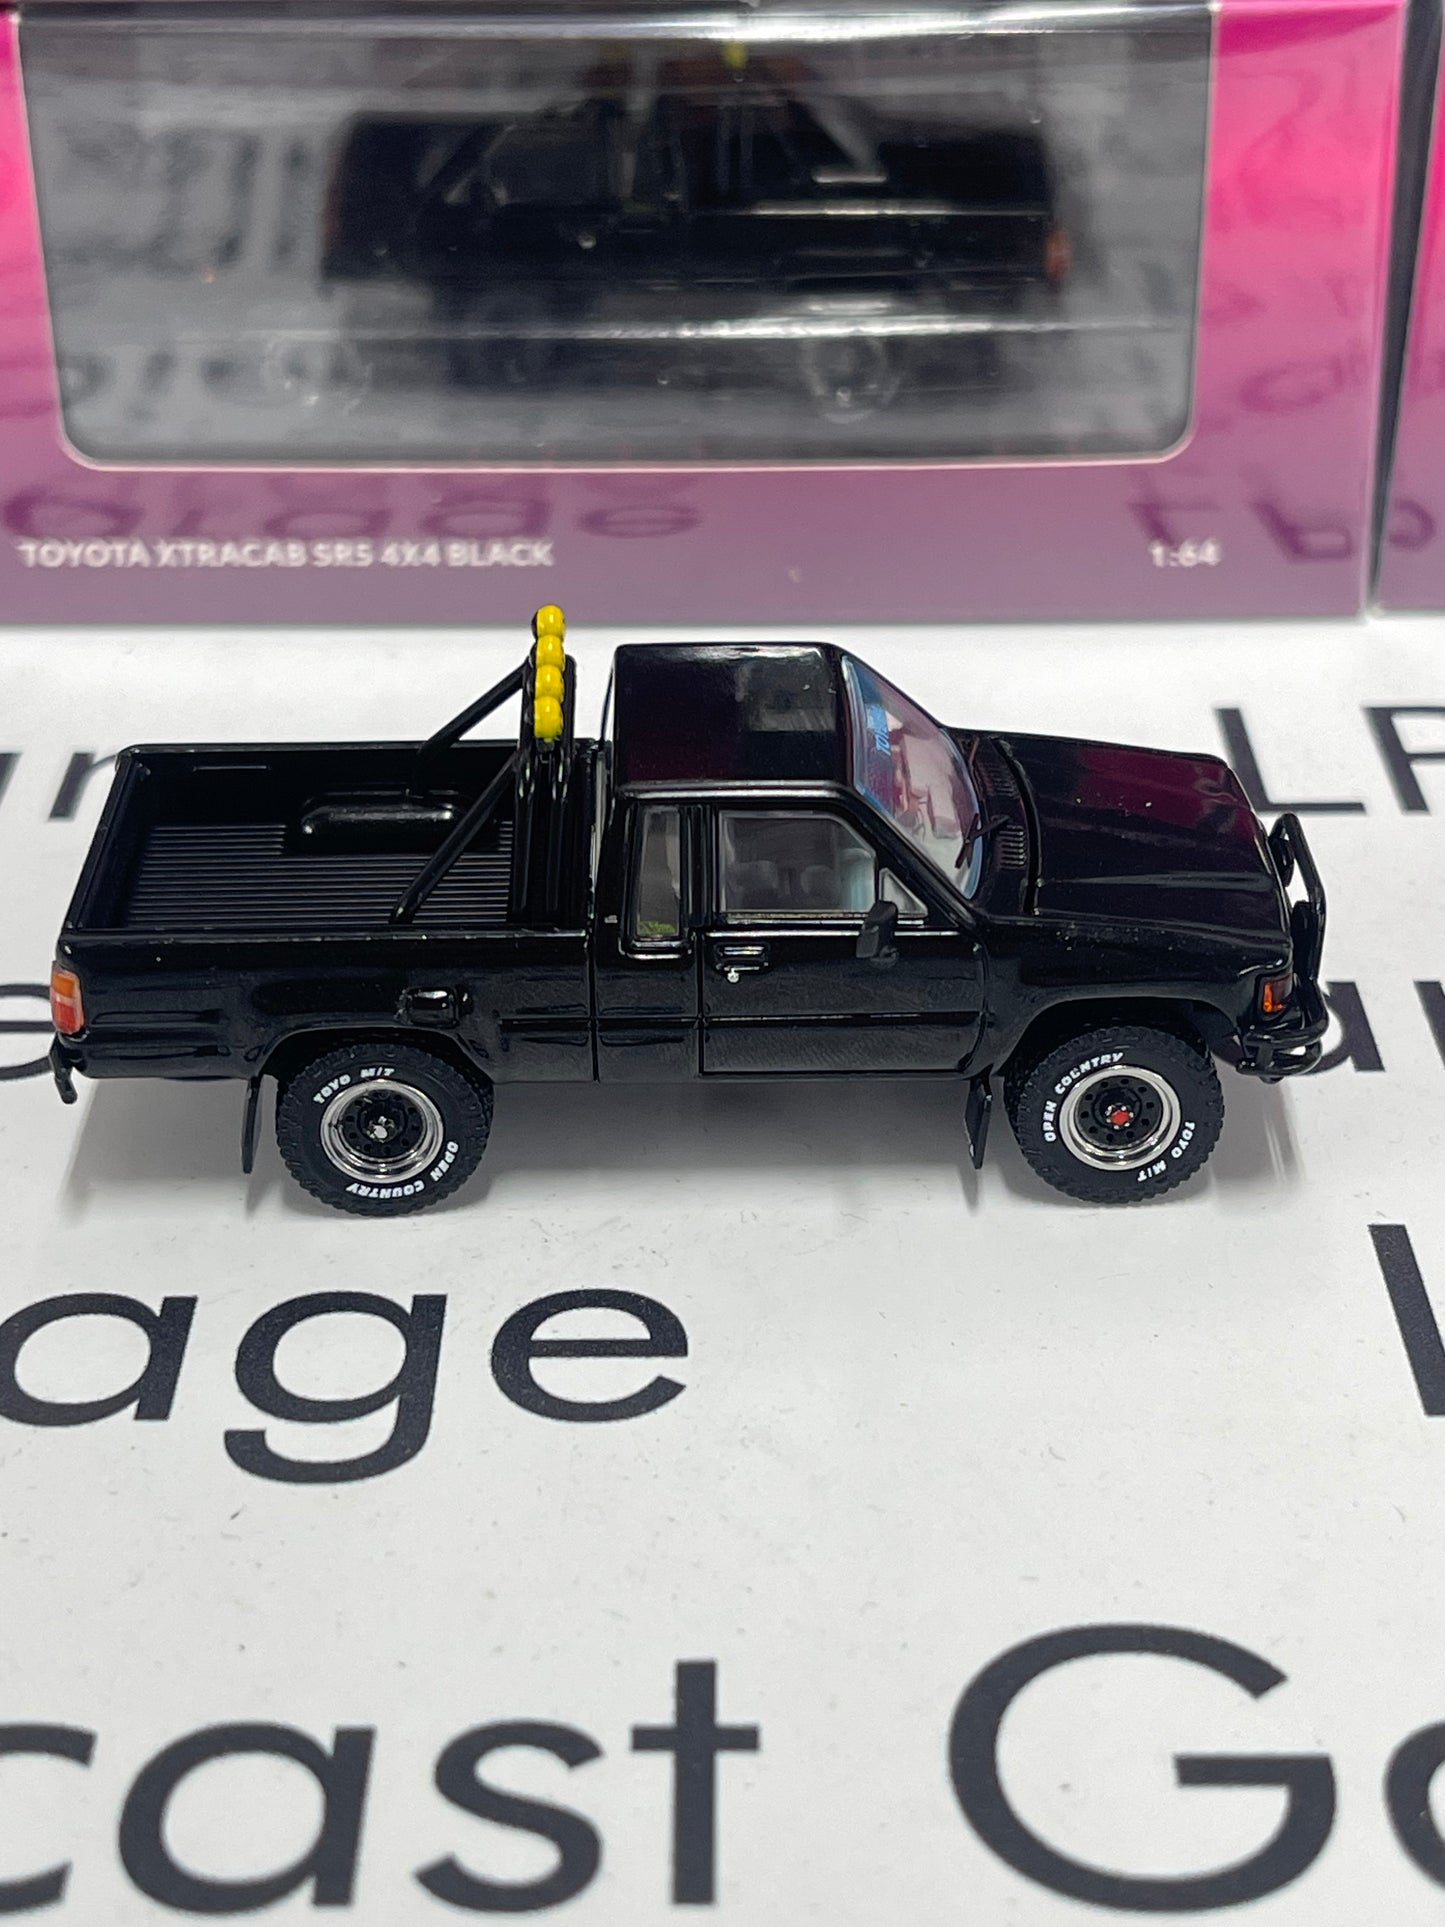 GCD DiecastTalk Exclusive 1985 Toyota Hilux SR5 Xtracab Black Pickup Truck Back To The Future BTTF Marty Mcfly 1:64 Diecast